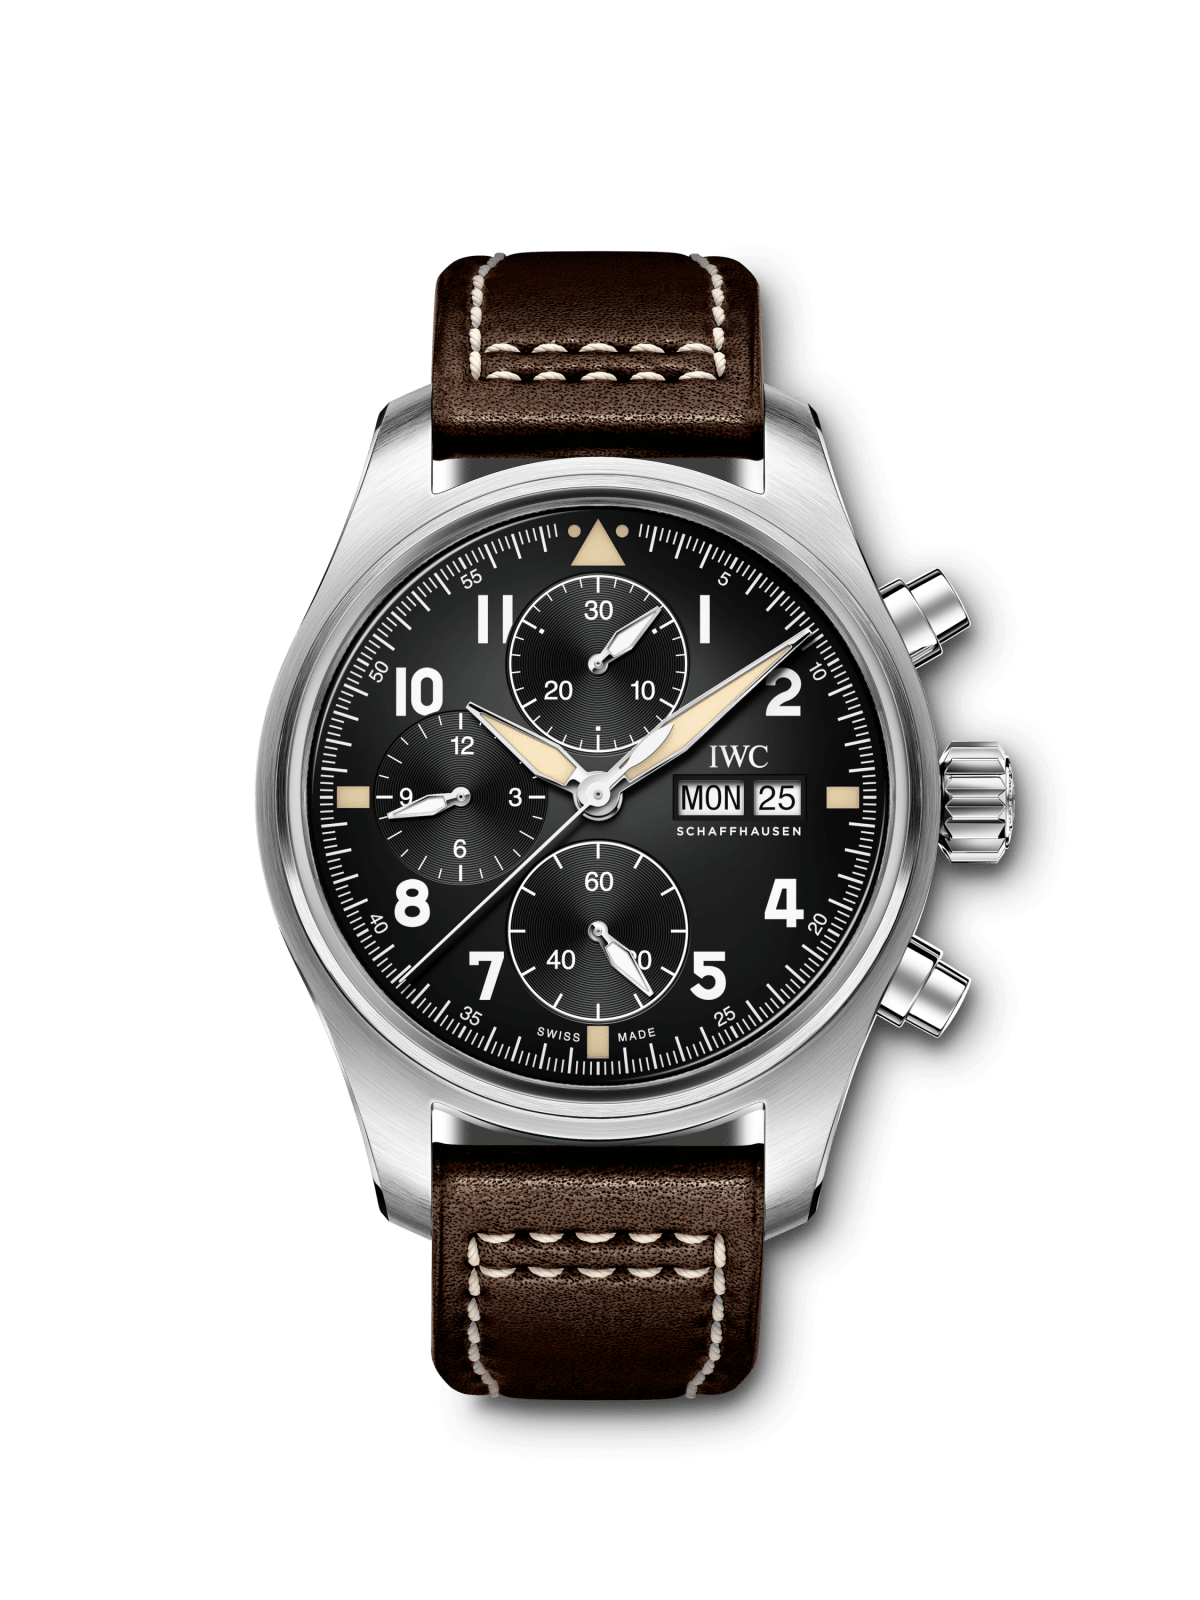 IWC Pilot’s Watch Chronograph Spitfire IW387903 for $7,030 • Black Tag ...